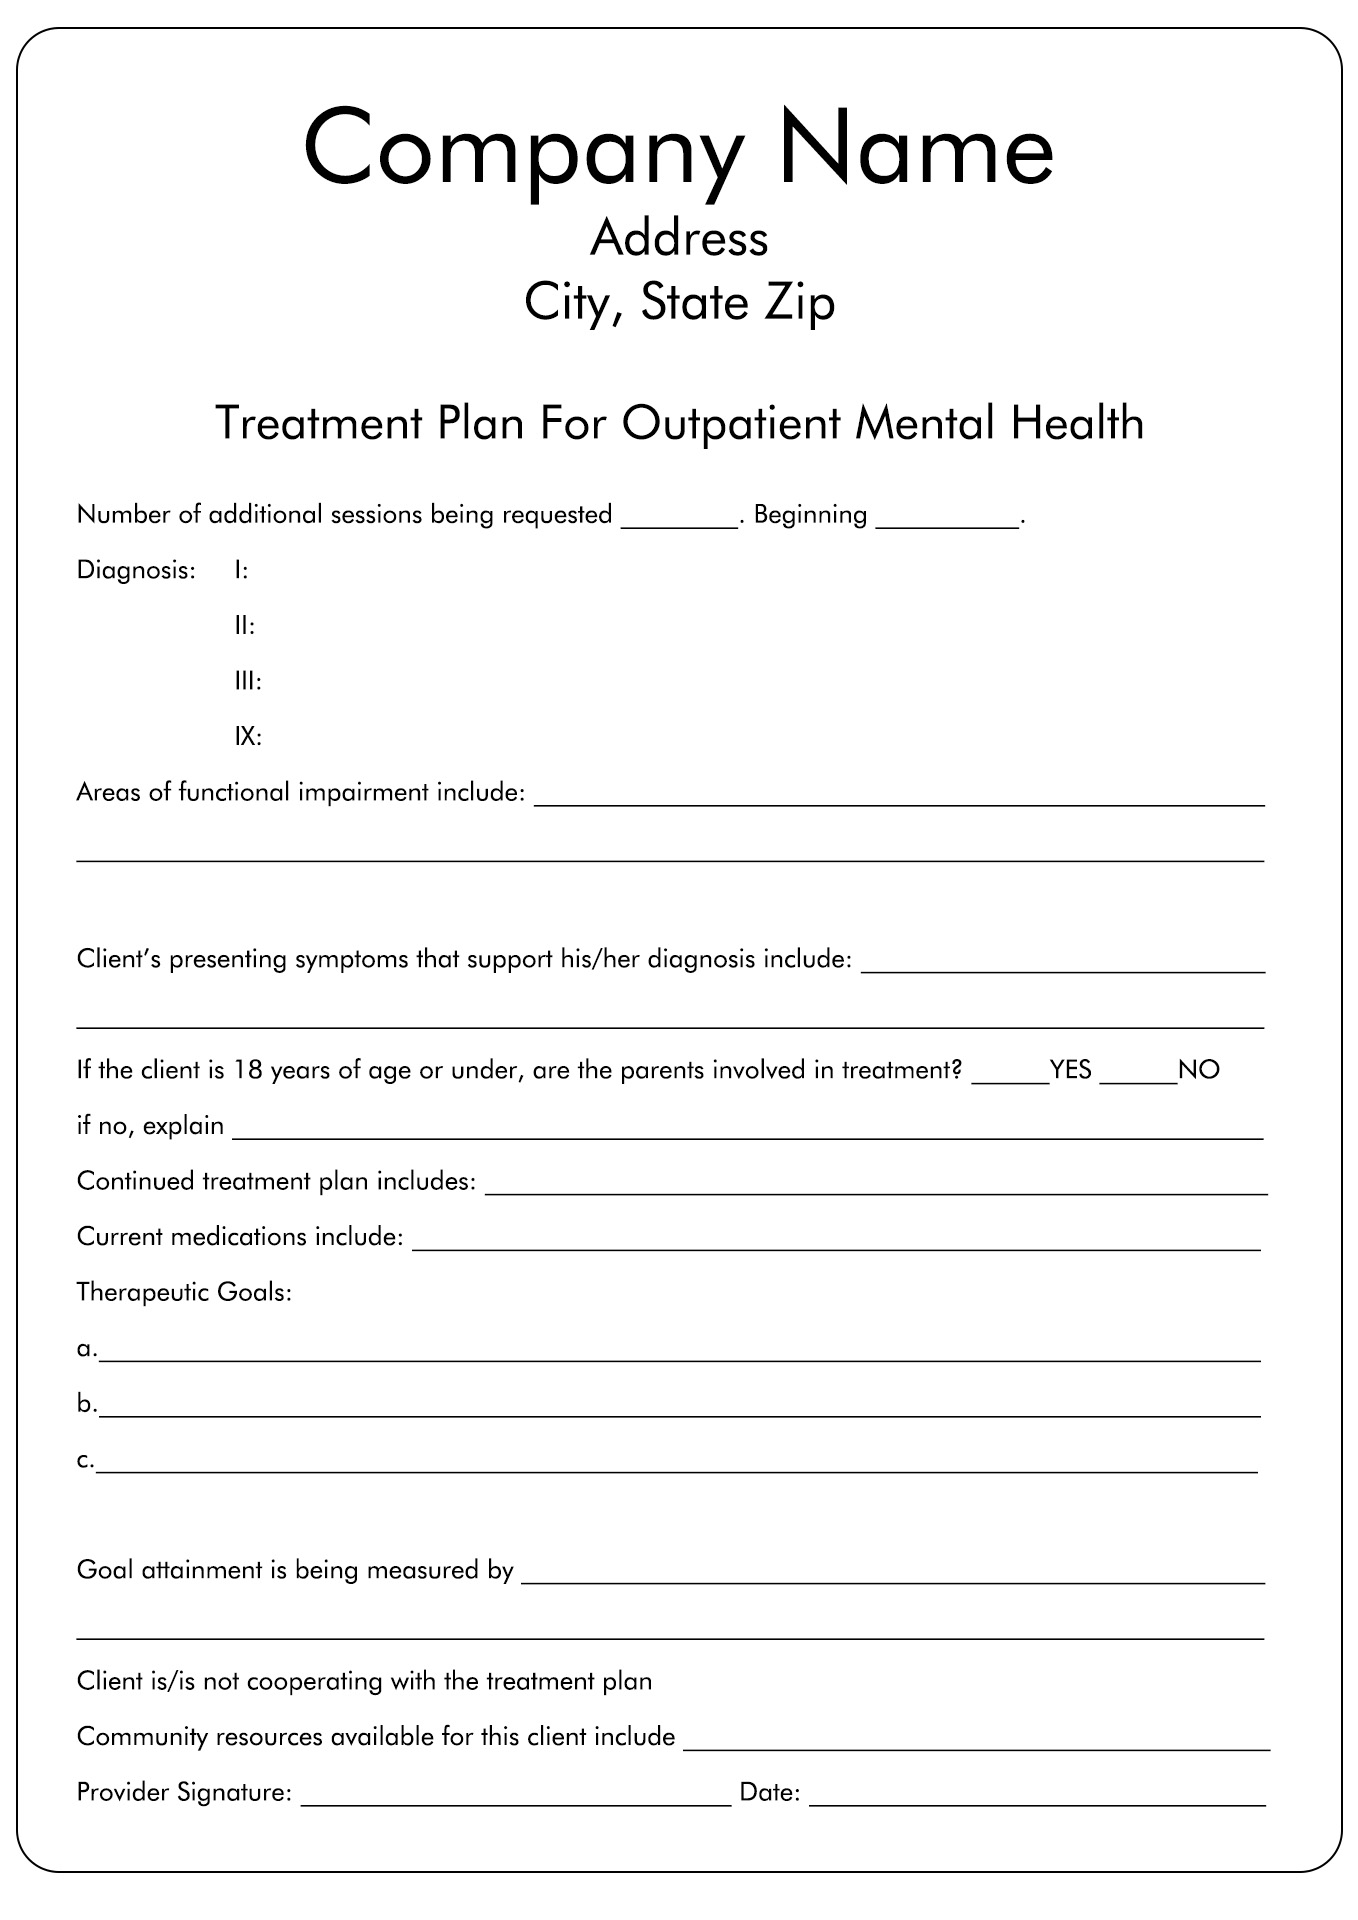 Substance Abuse Treatment Plan Templates Image